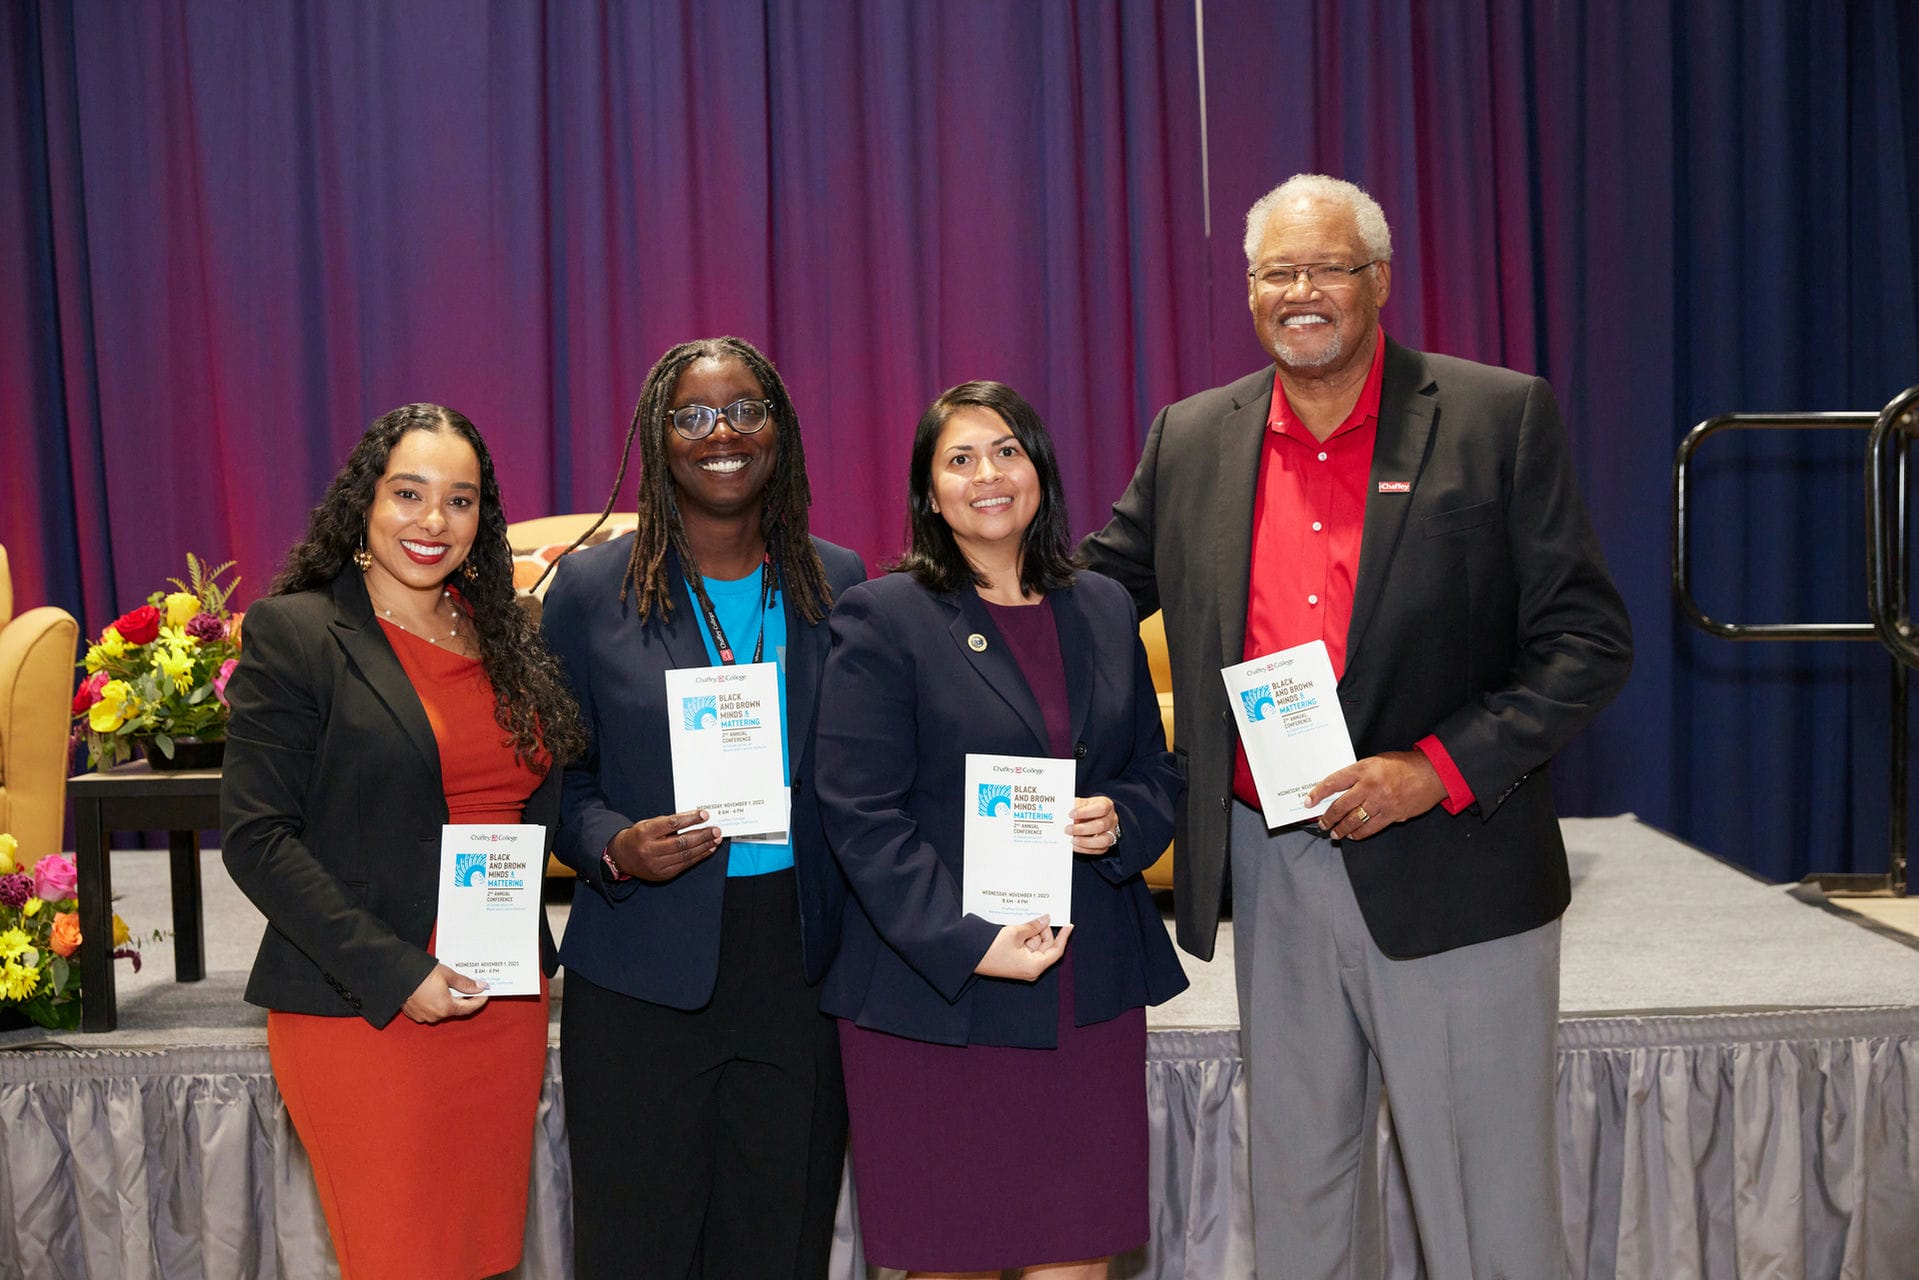 Dr. Henry Shannon with conference speakers